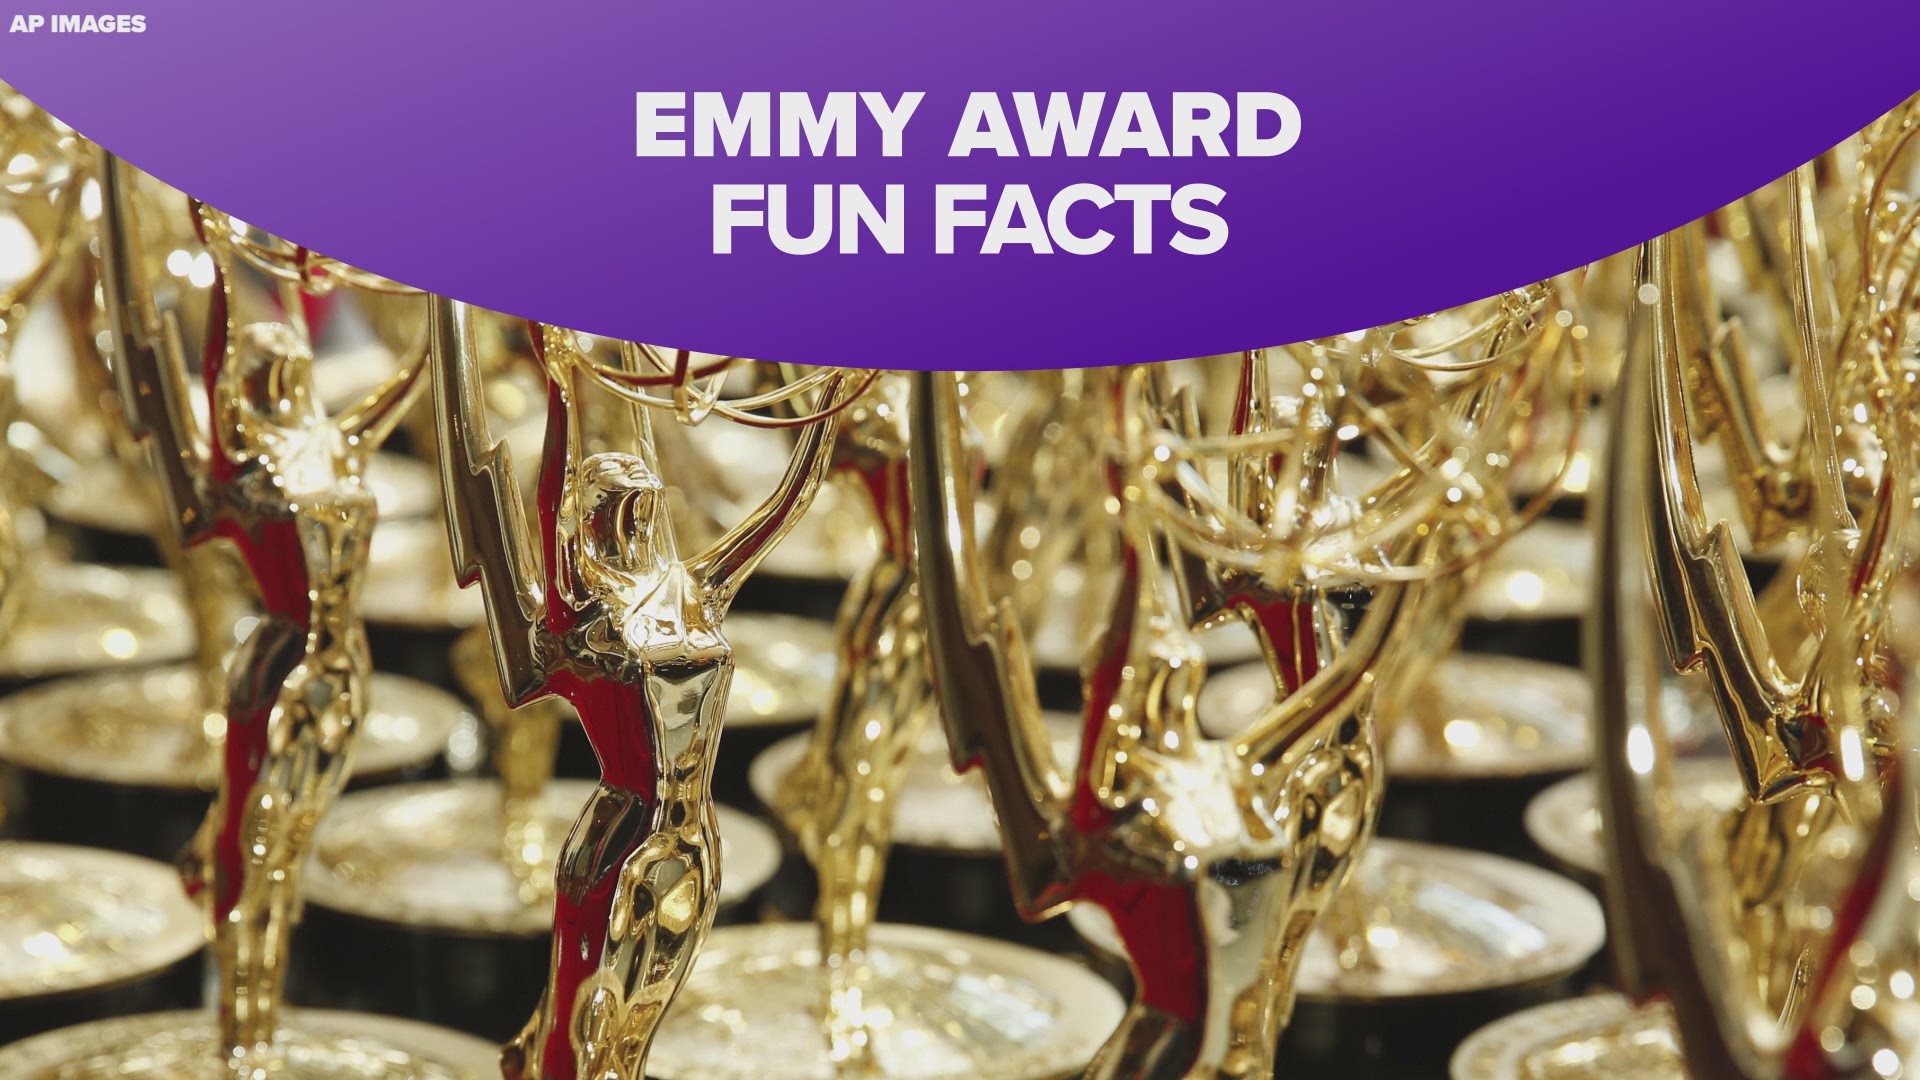 Here's a look at some facts, some pretty obscure, about the Emmy Awards.